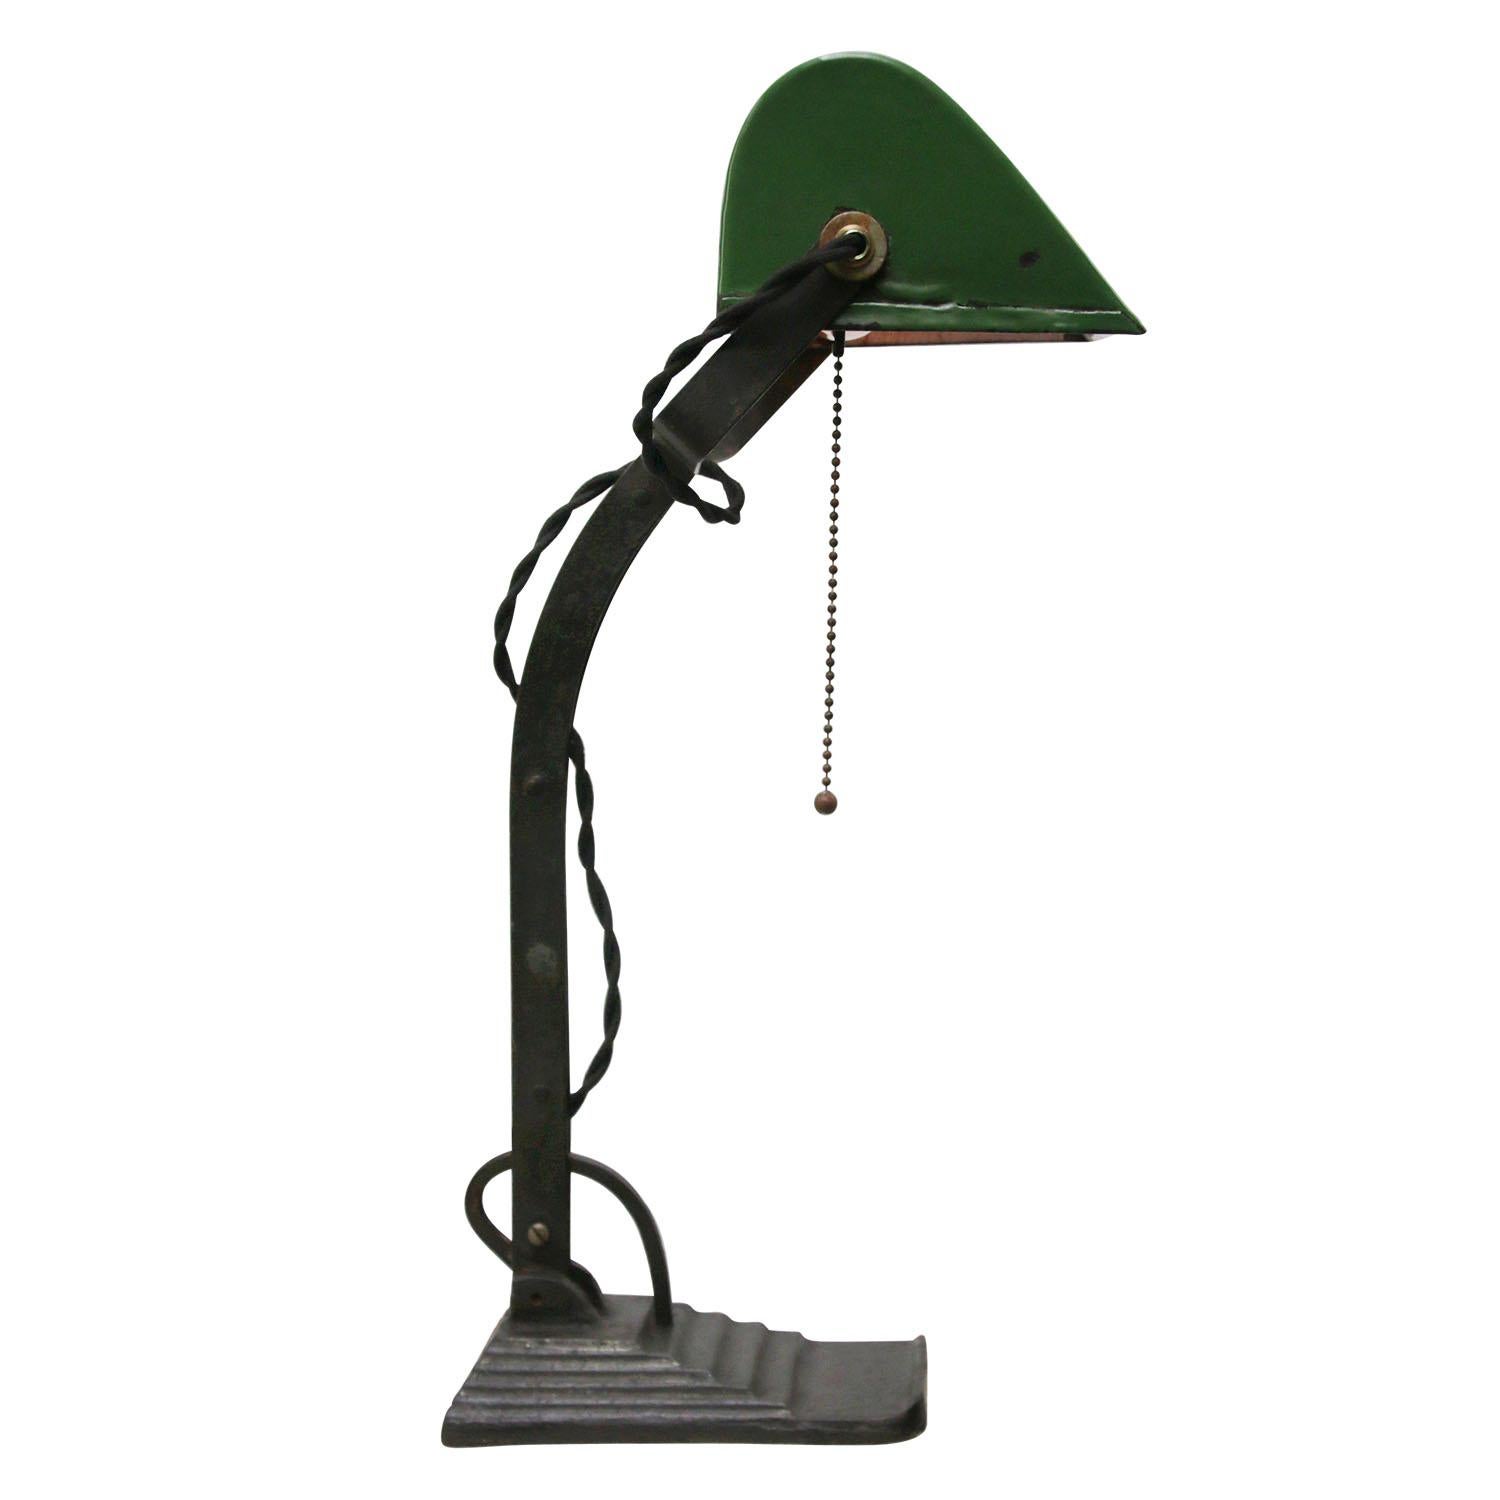 Green enamel desk light. Bankers lamp
2.5 meter black cotton flex, plug and pull switch

Also, available with US/UK plug

Weight: 2.30 kg / 5.1 lb

Priced per individual item. All lamps have been made suitable by international standards for